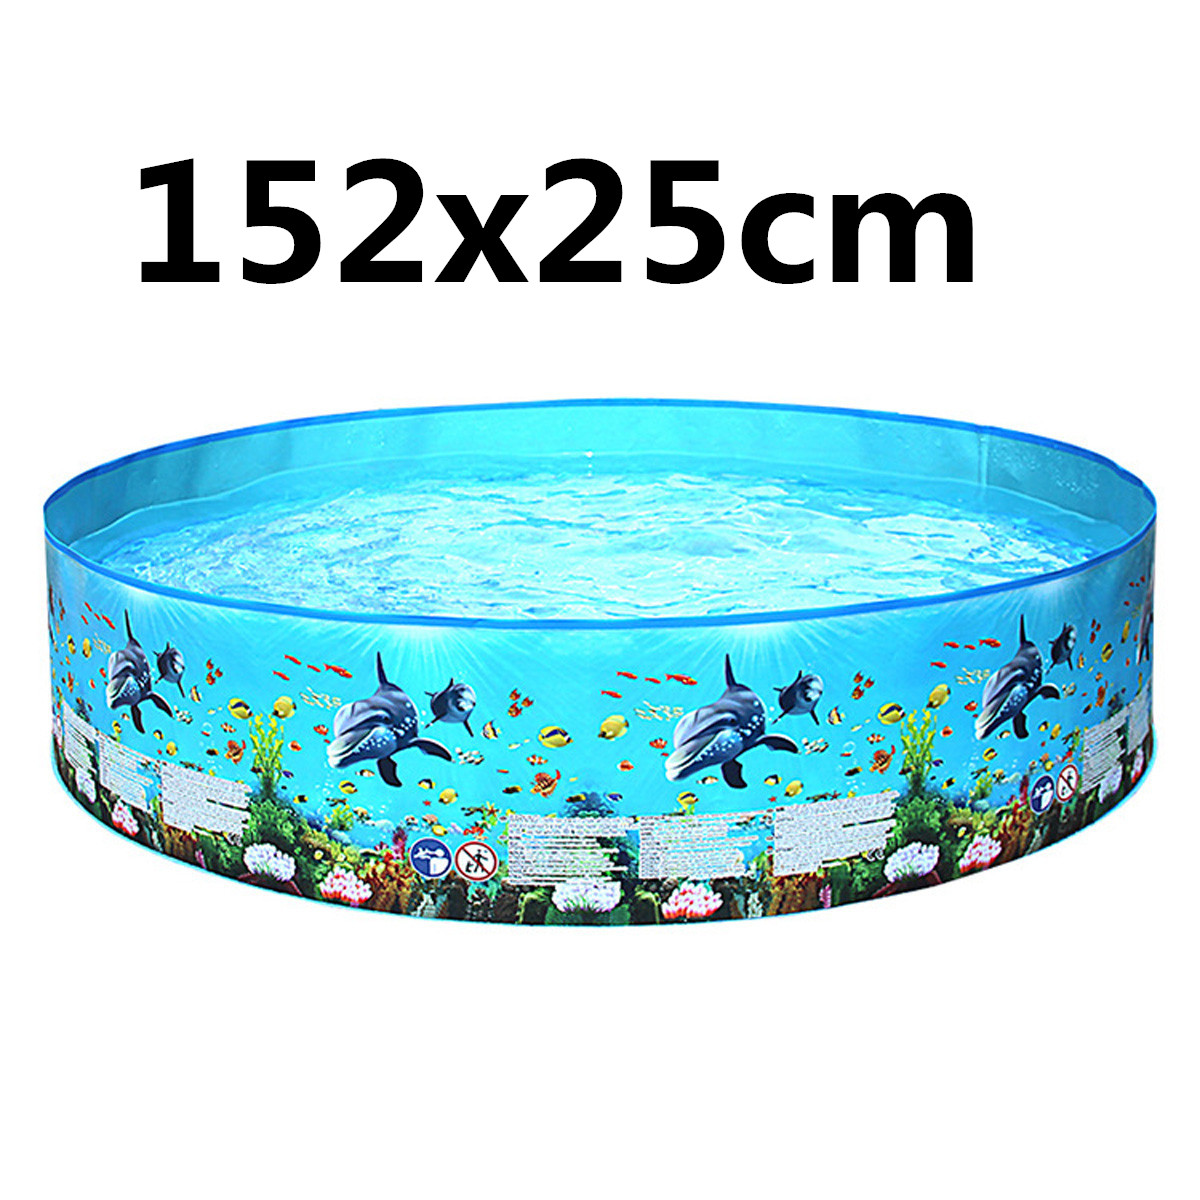 Large-Size-Kids-Inflatable-Pool-Childrens-Home-Use-Paddling-Pool-Round-Swimming-Pool-Baby-Summer-Wat-1686704-2